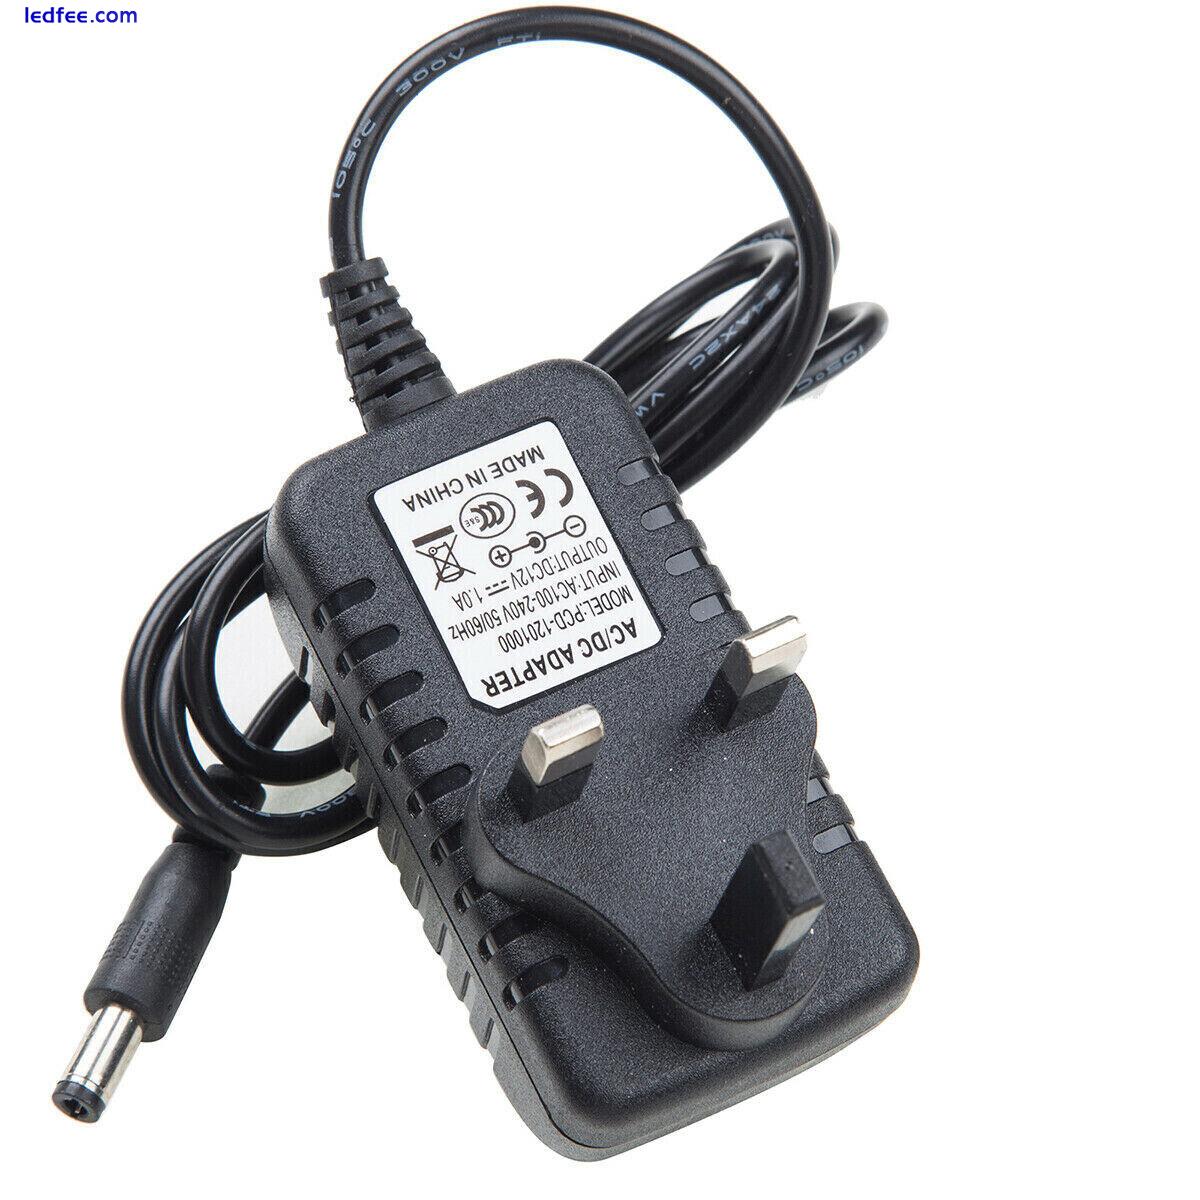 12V 1A 2A AC/DC Power Supply Adapter Safety Charger For LED Strip CCTV Camera 1 